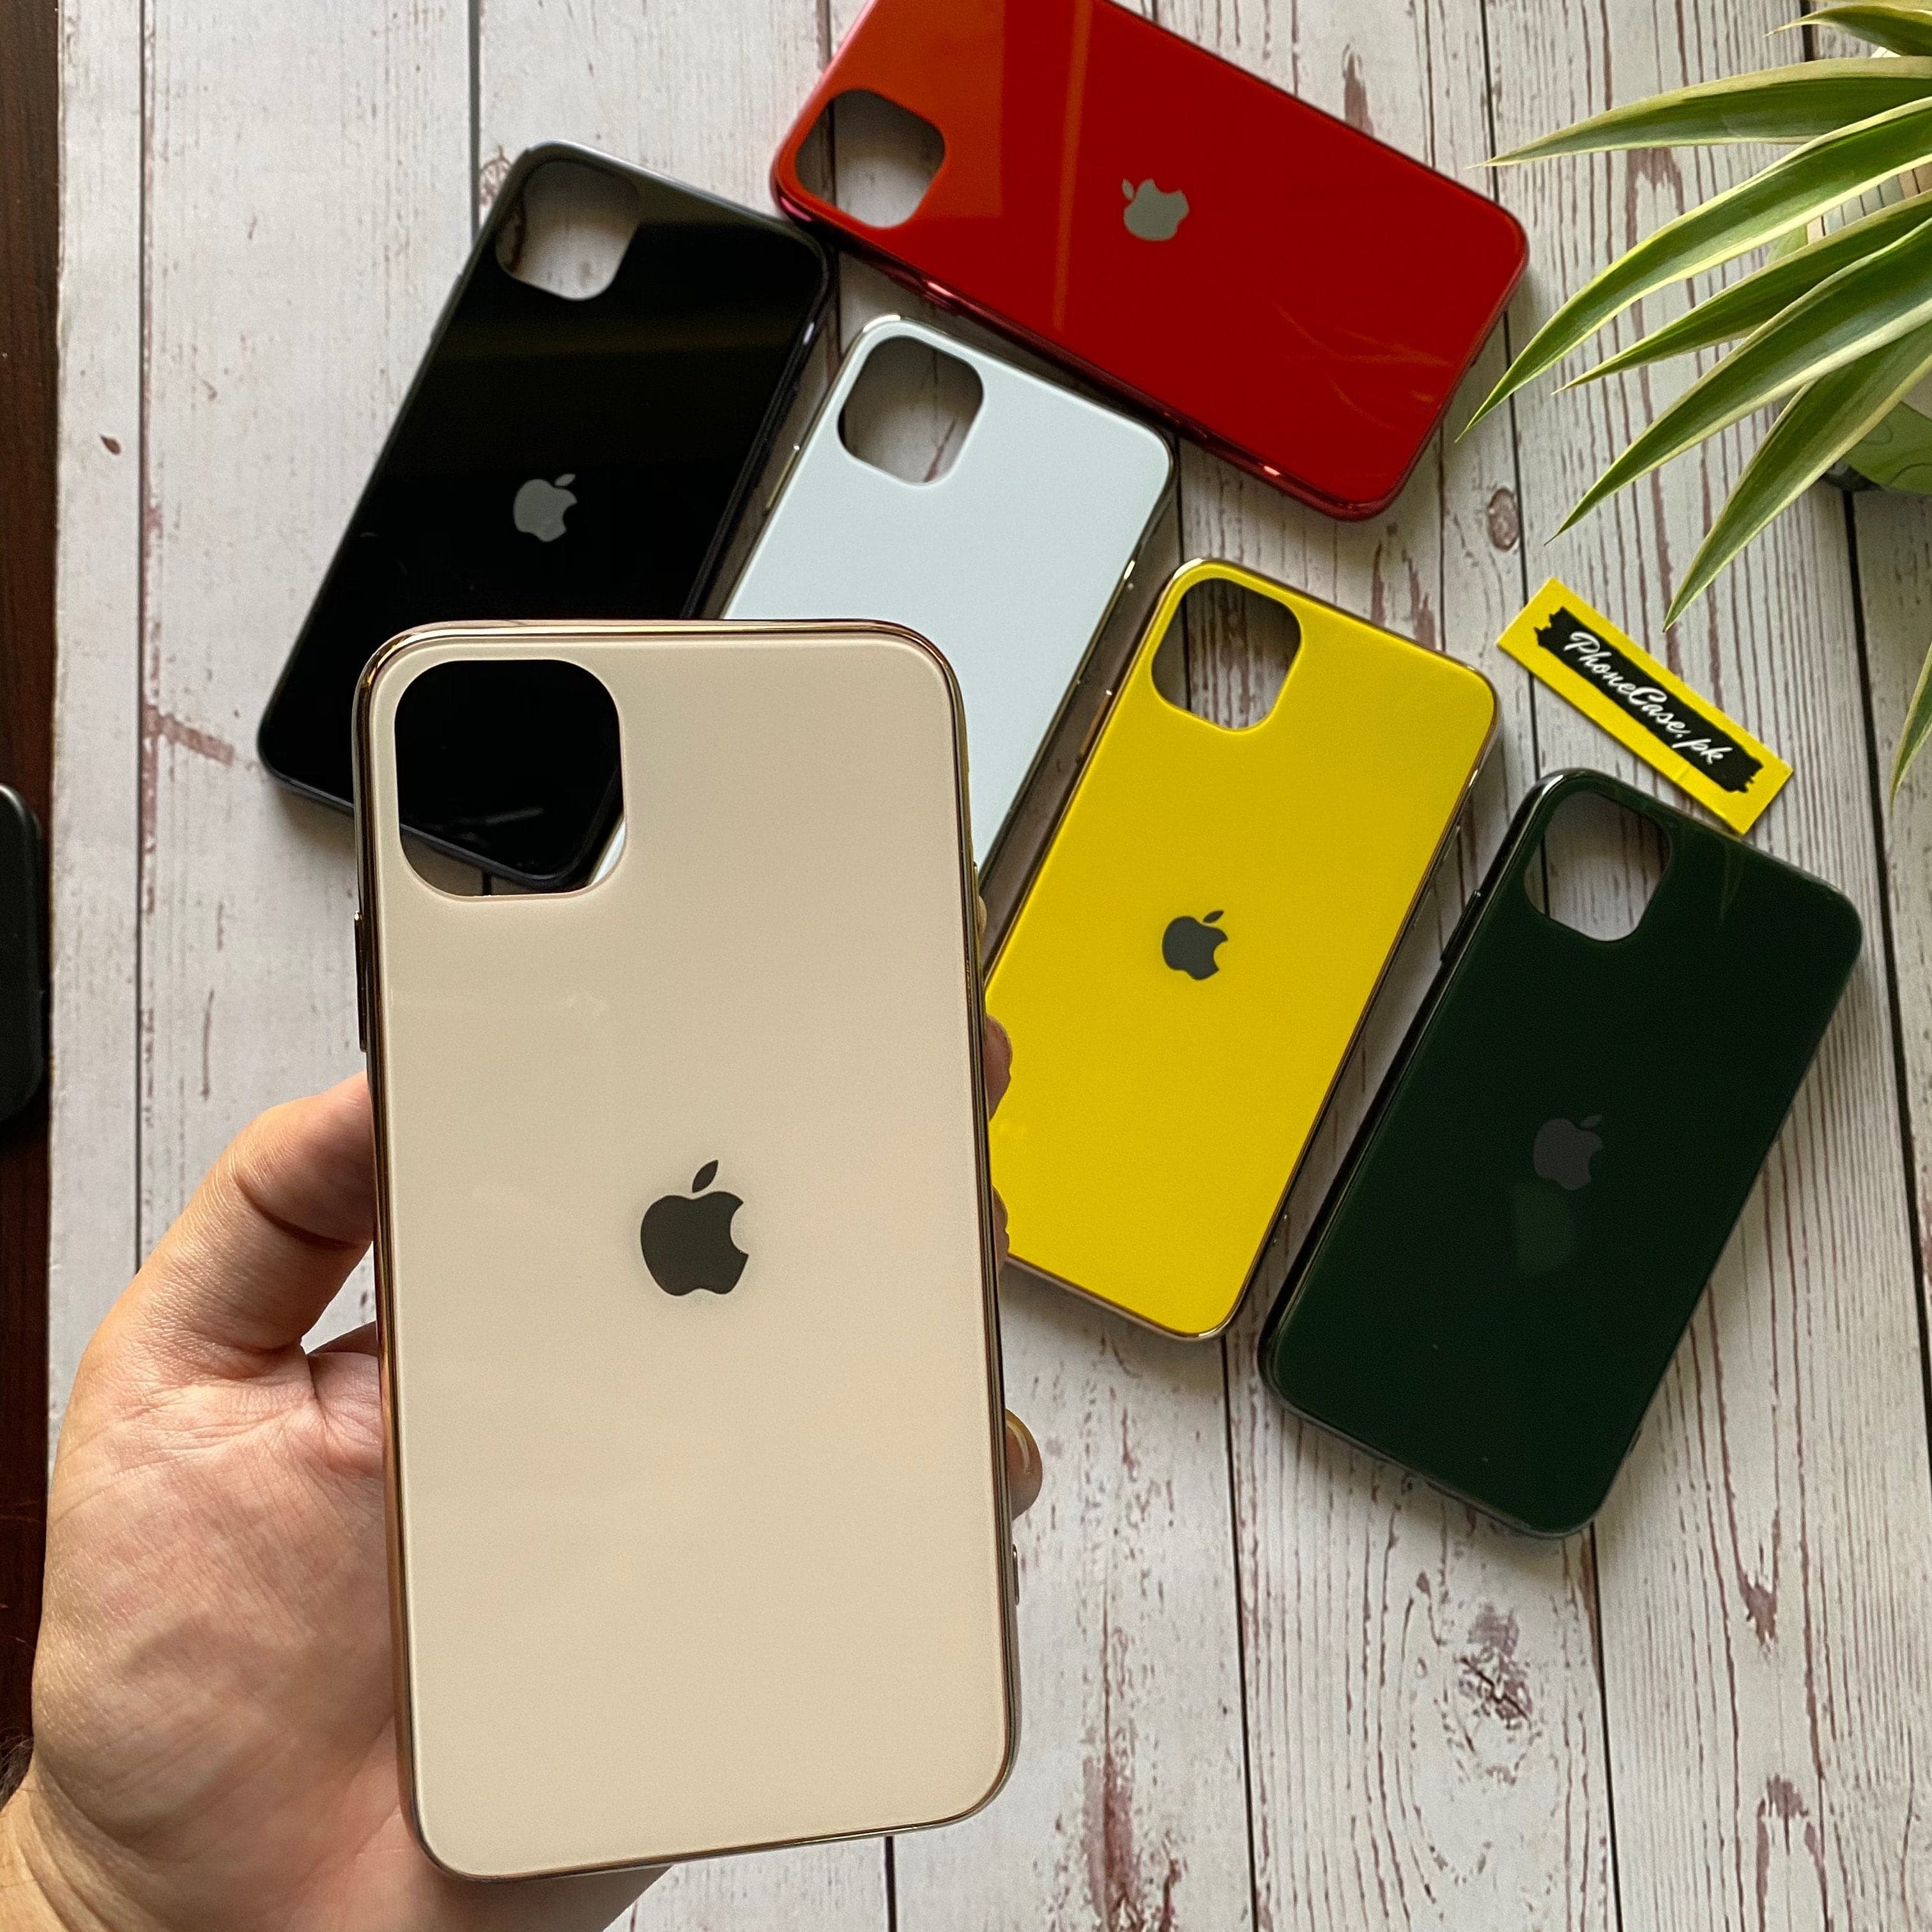 iPhone 11 Series Premium Glass Back Tempered Glass Case with logo